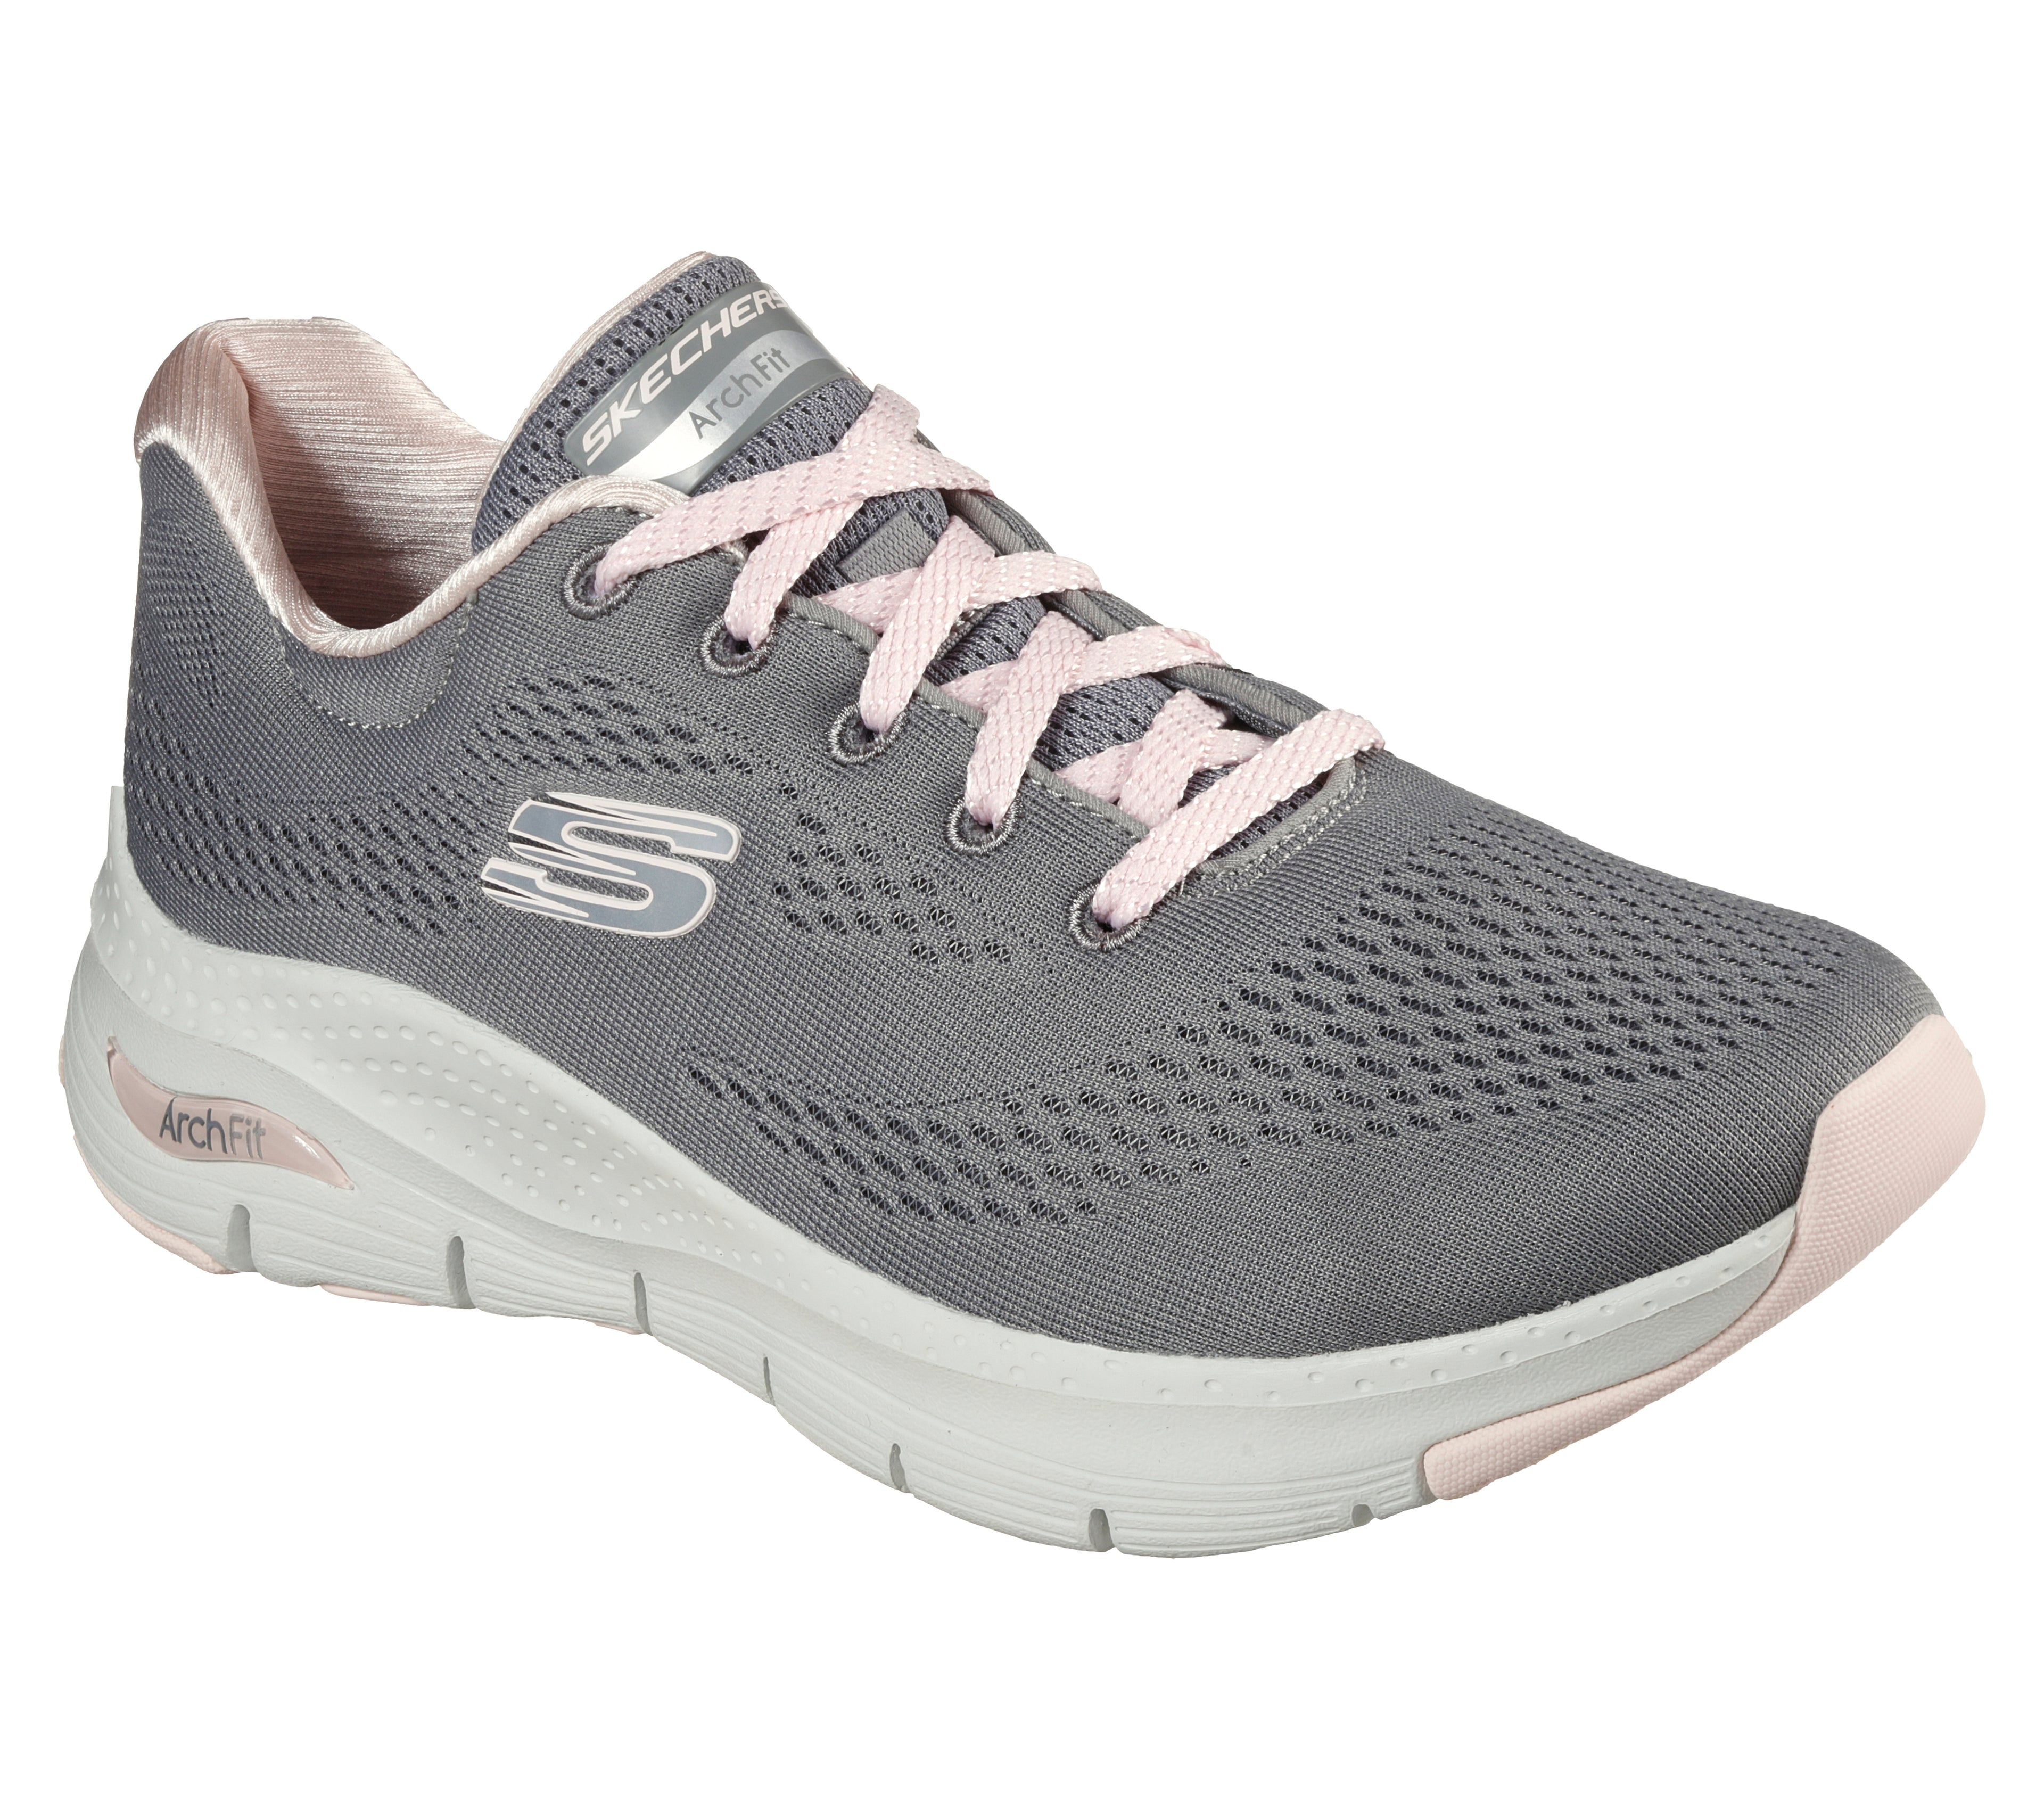 Skechers Arch Fit Big Appeal Grey Pink 149057